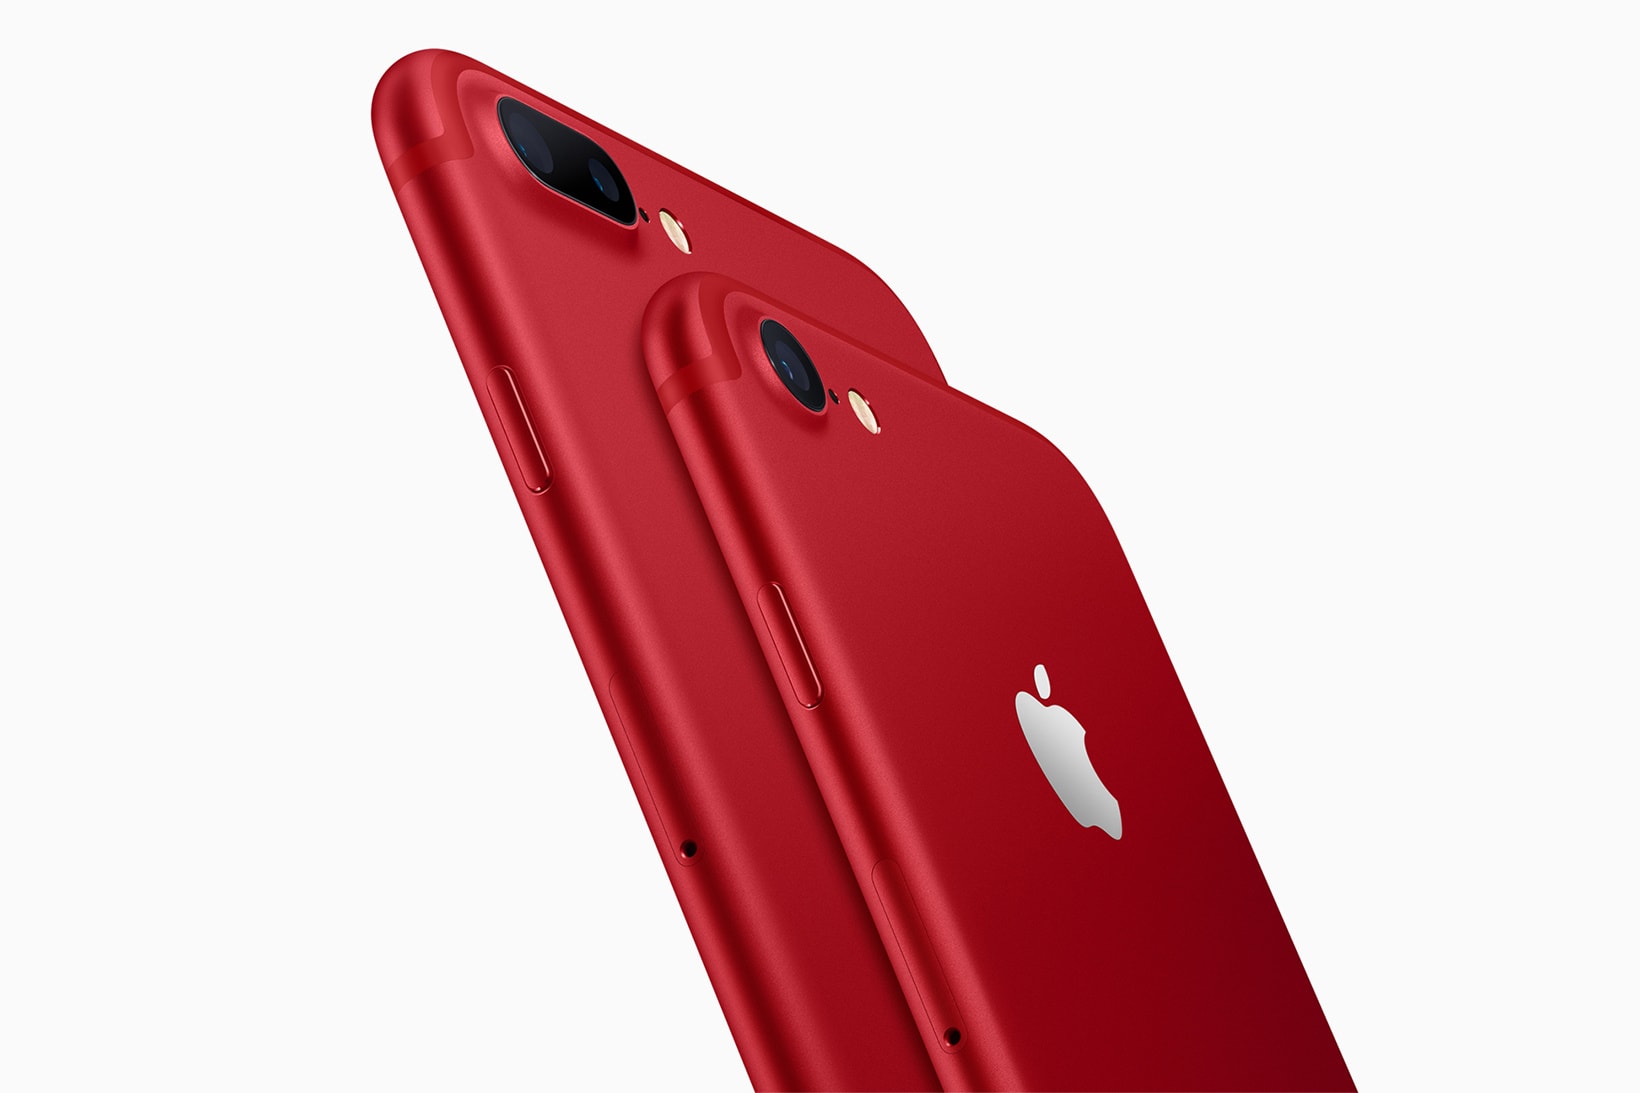 apple iPhone 7 iPhone 7 plus (PRODUCT) RED アップル　アイフォン7 アイフォン7プラス　(プロダクト)レッド